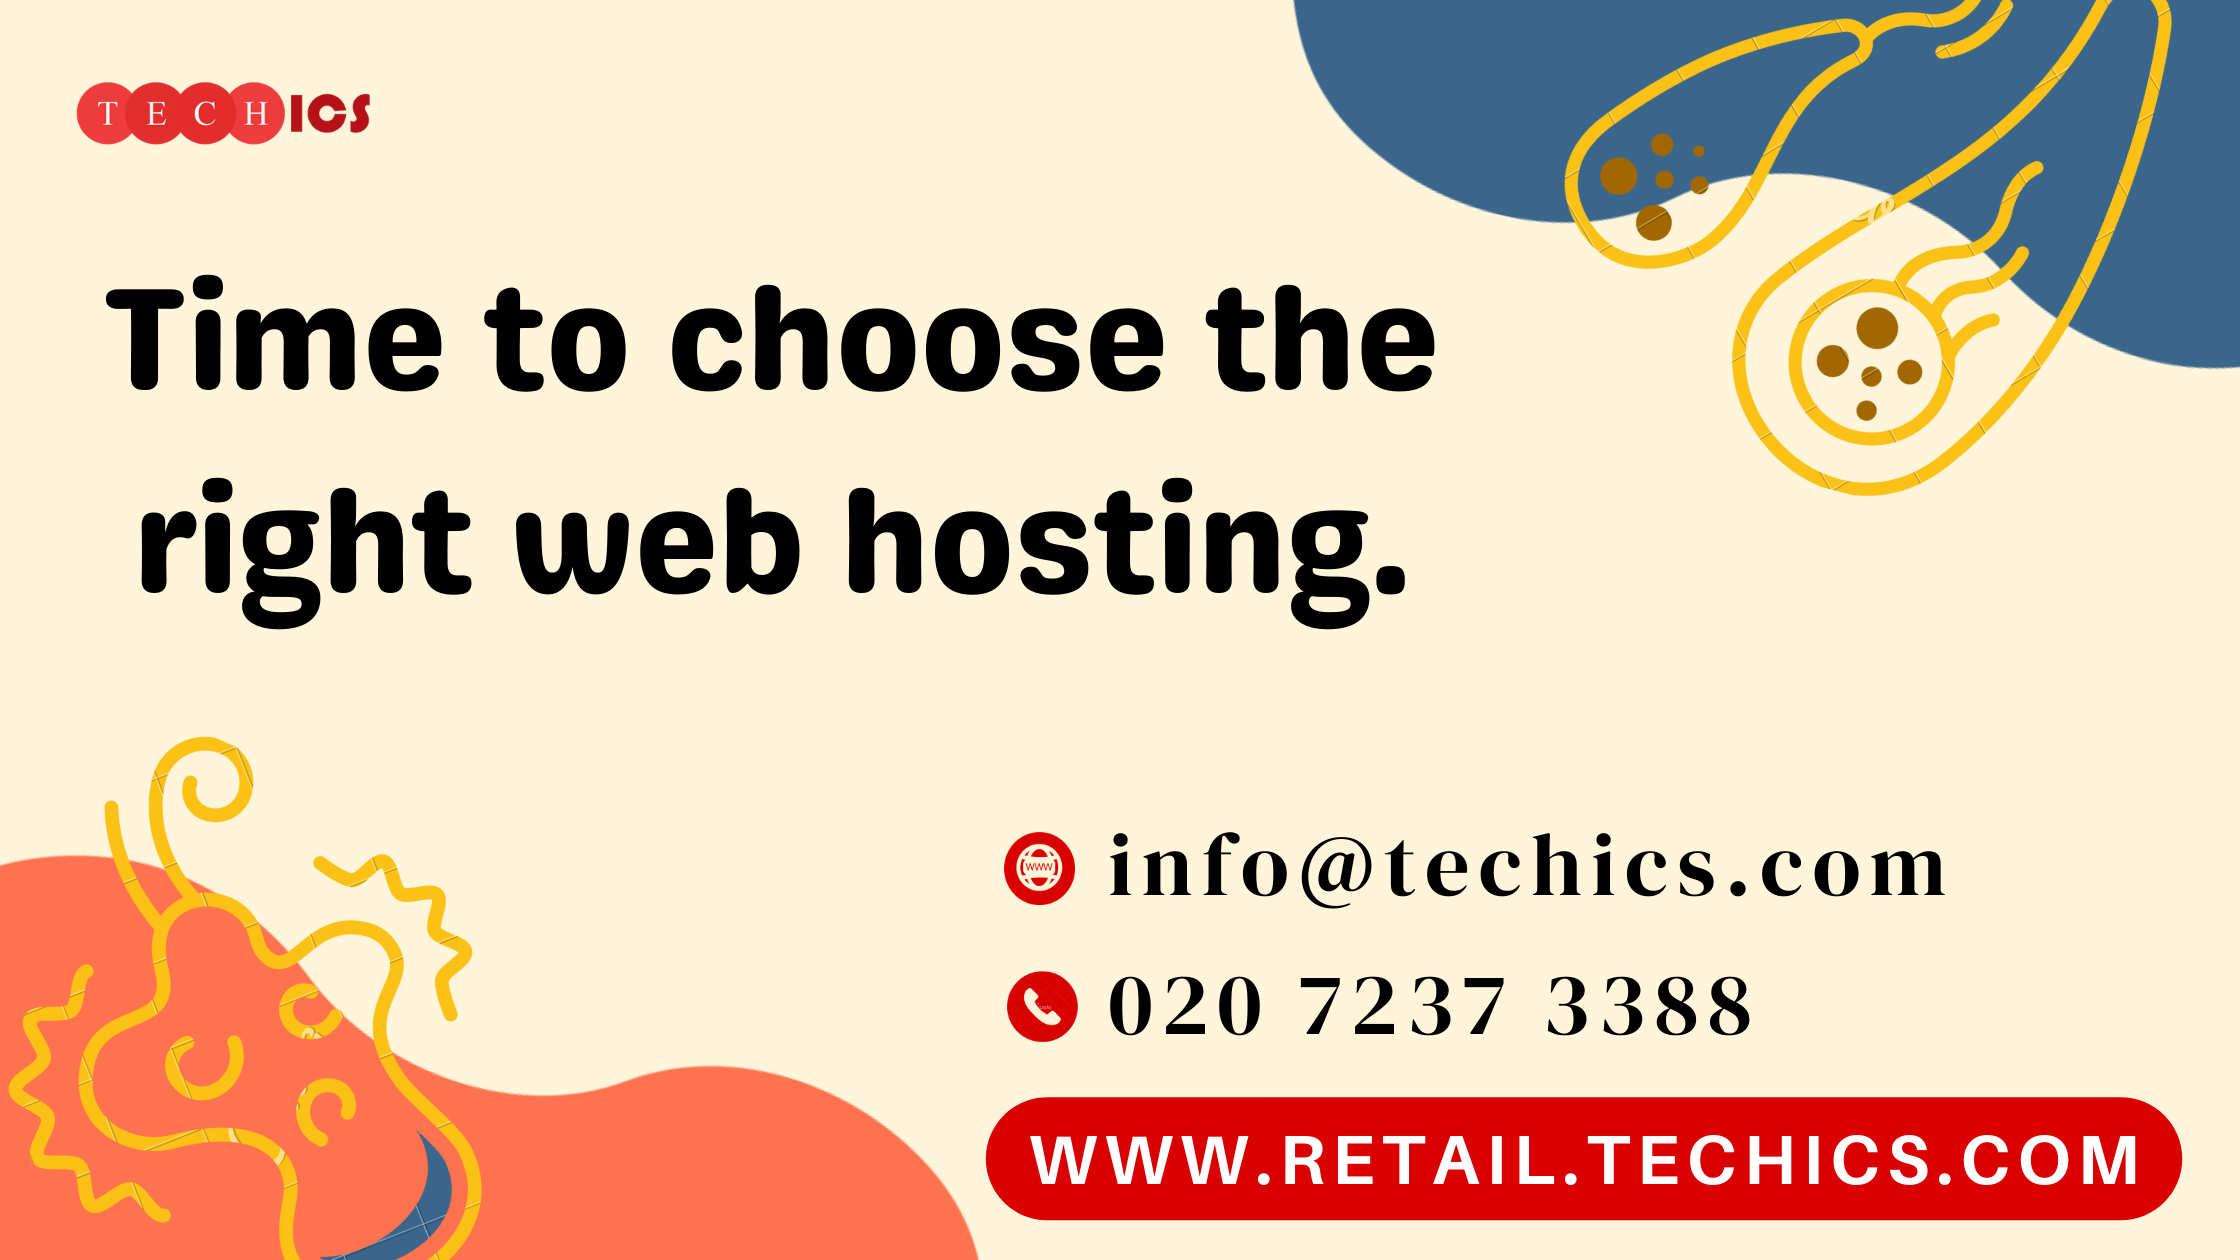 How to choose the right web hosting.